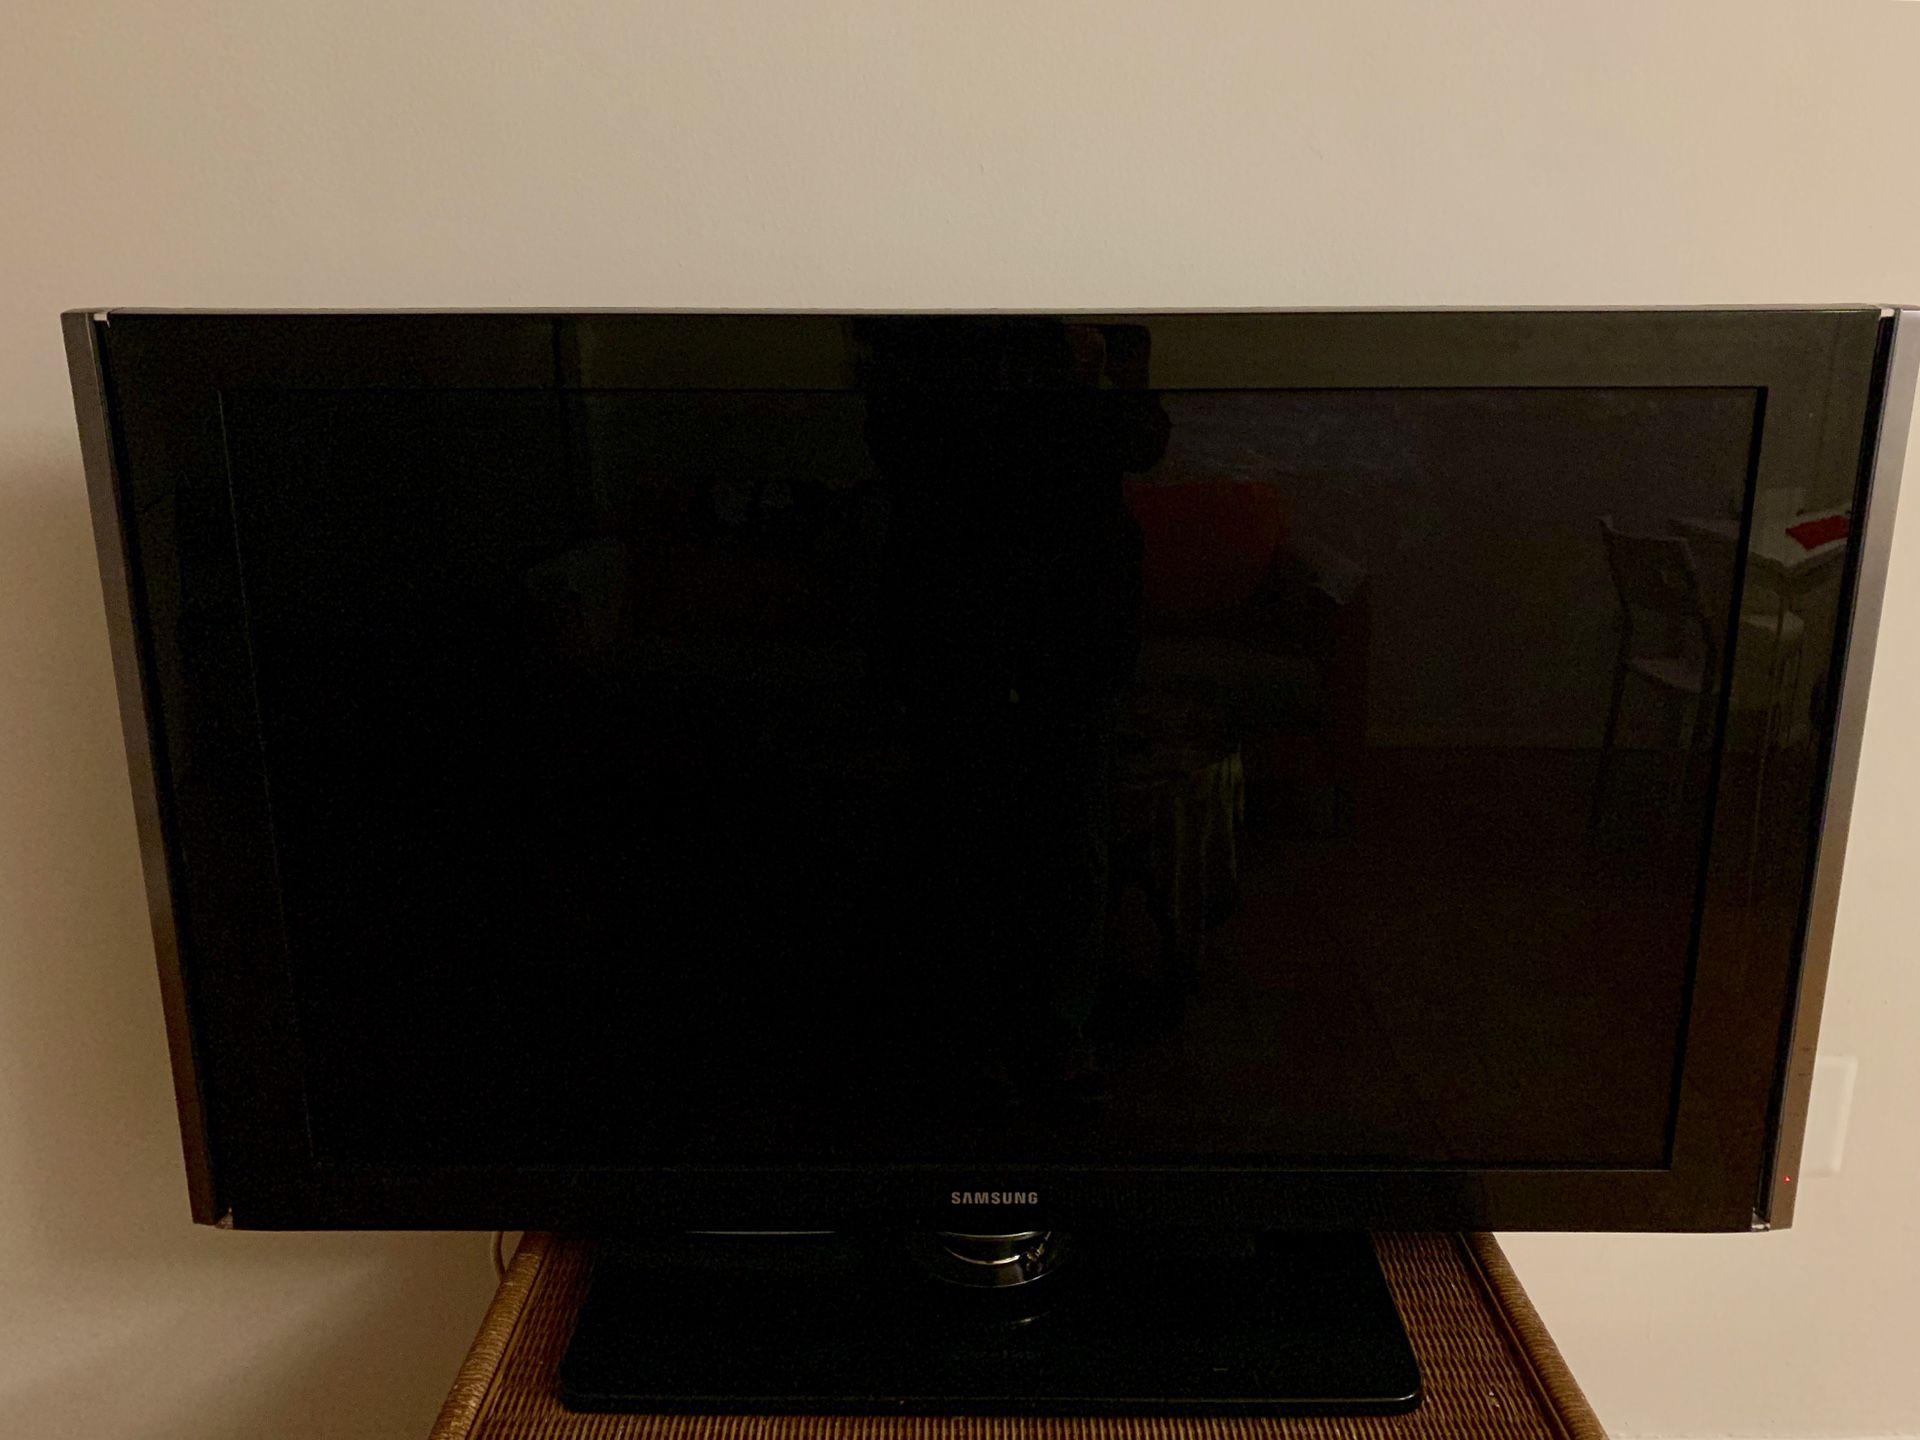 Samsung LCD TV, 55 inches